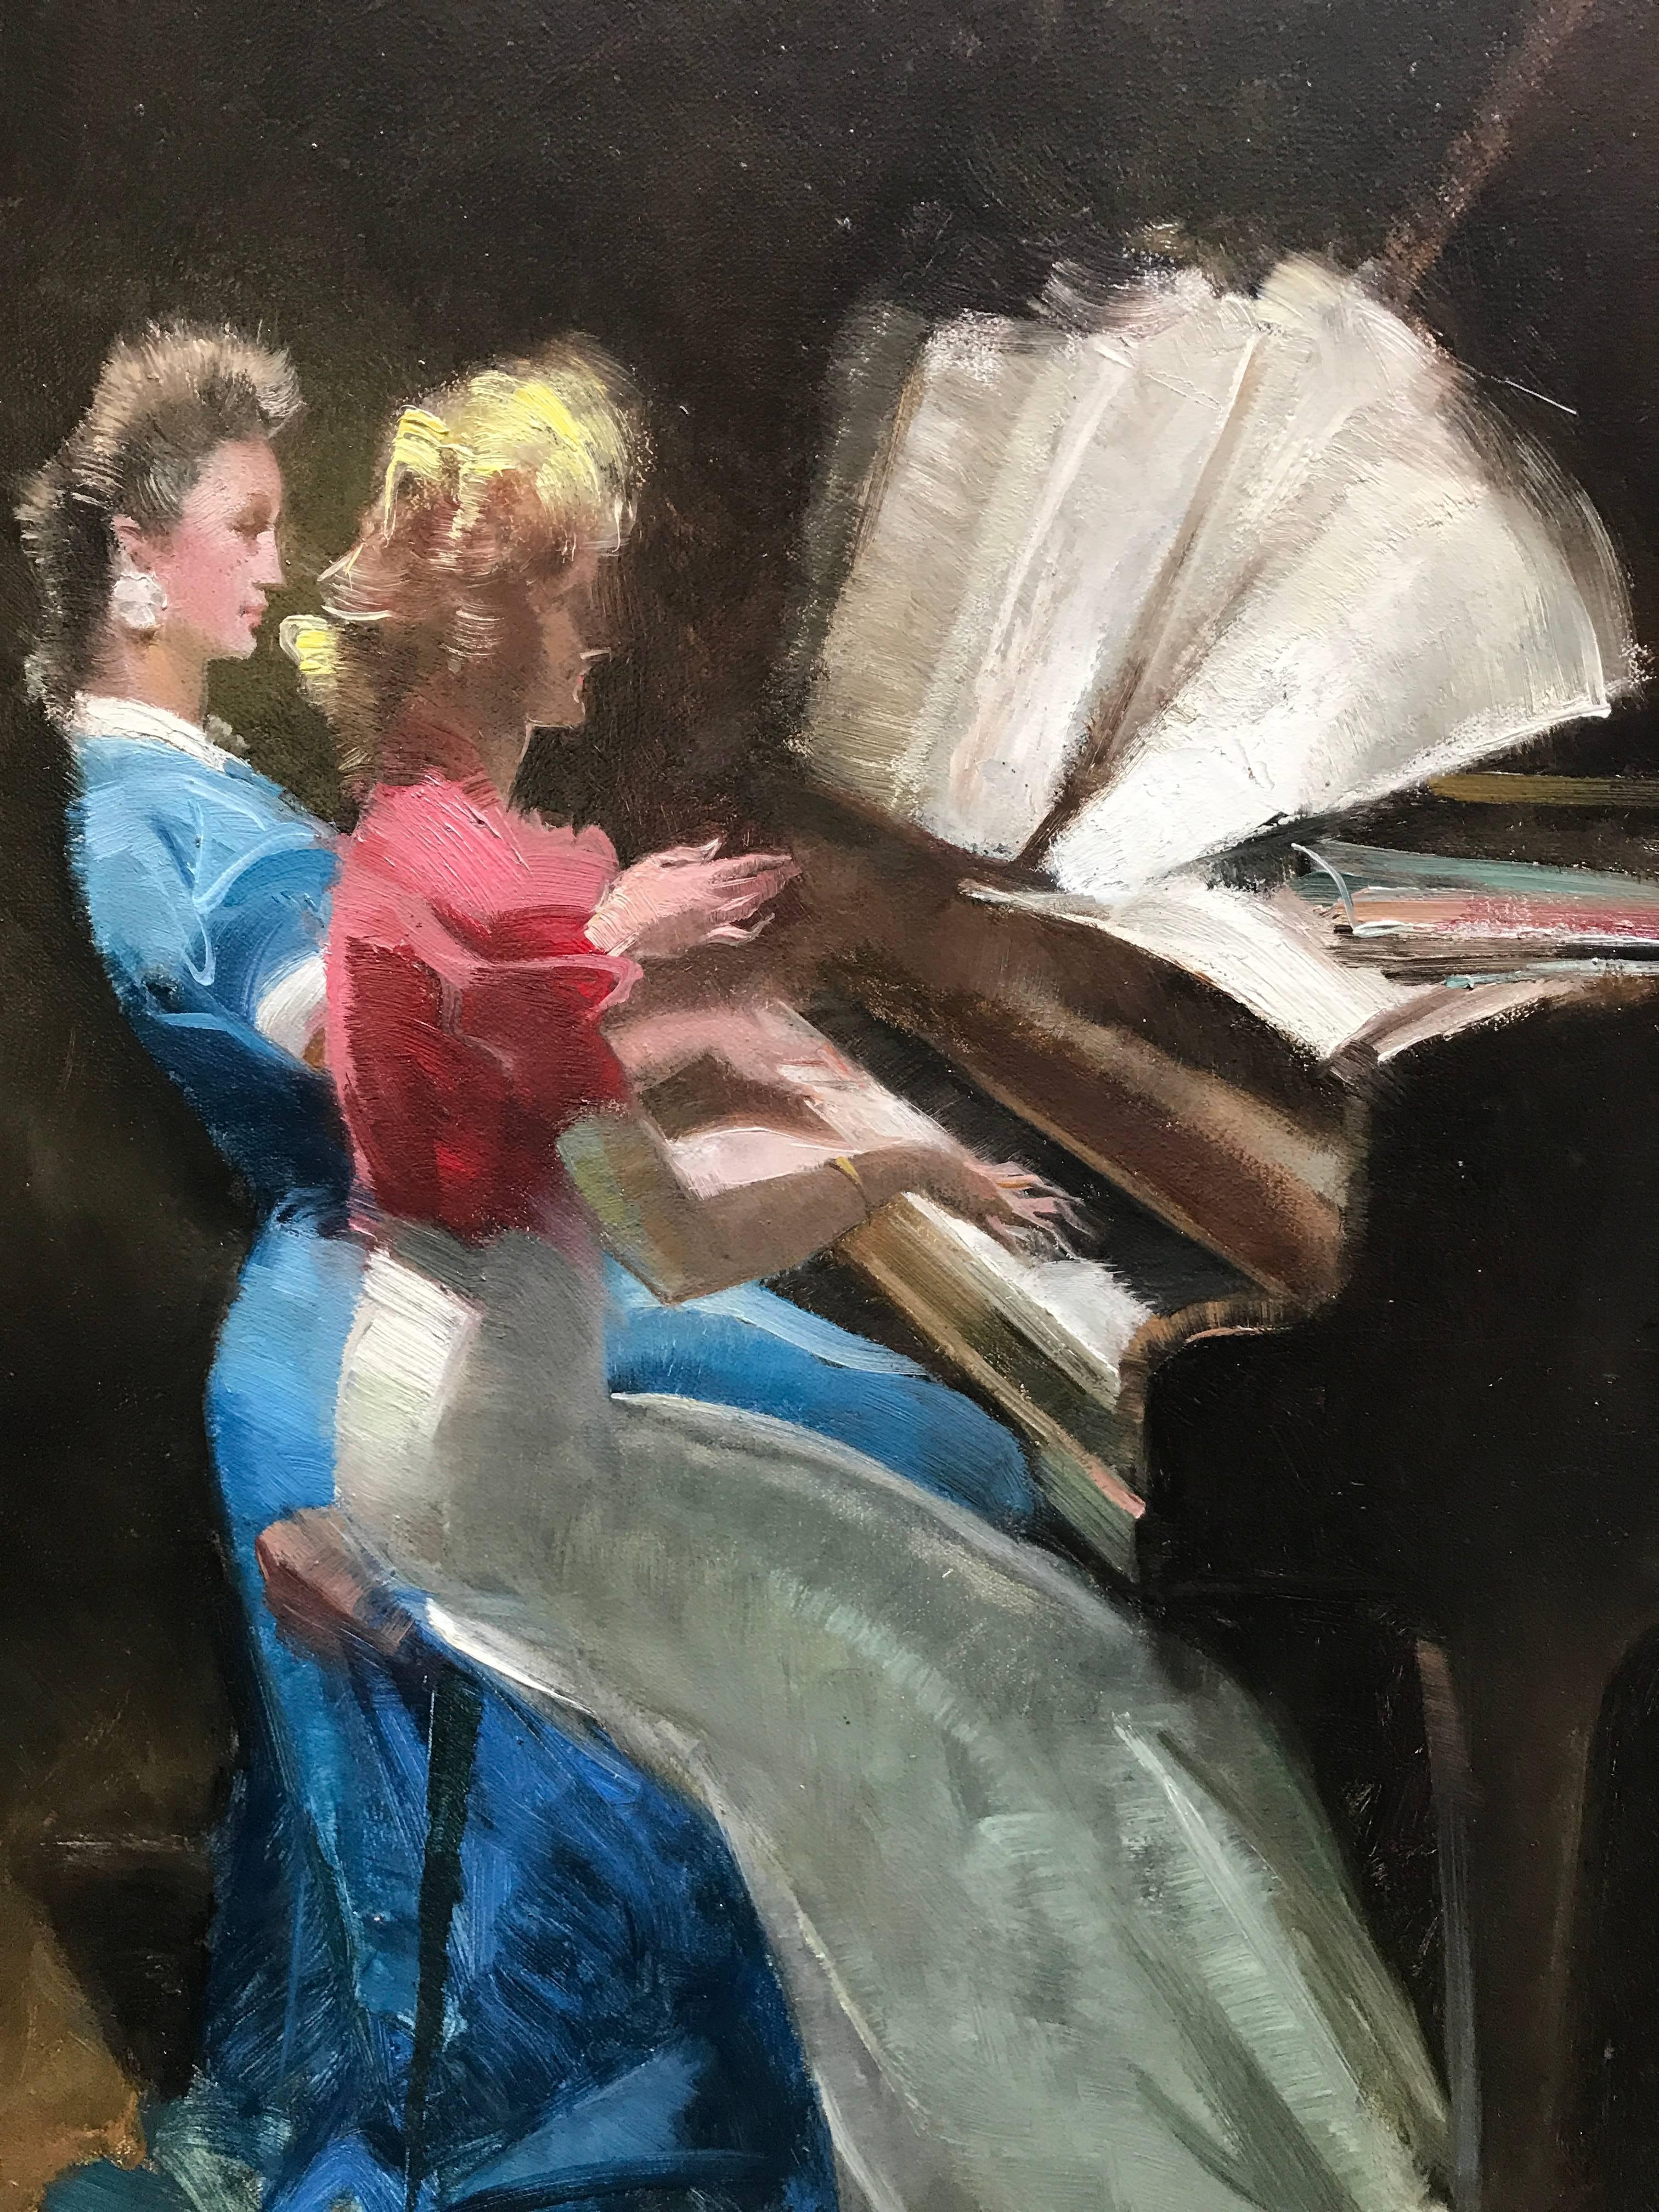 oil on canvas, 60x50cm, 72x62 cm included frame.
Belgian painter of figures, portraits, genre scenes and also illustrator.
Student at the Academy of Sint-Gillis near Brussels.
Worked and studied also in Paris.
Works in the Museum of Brussels.